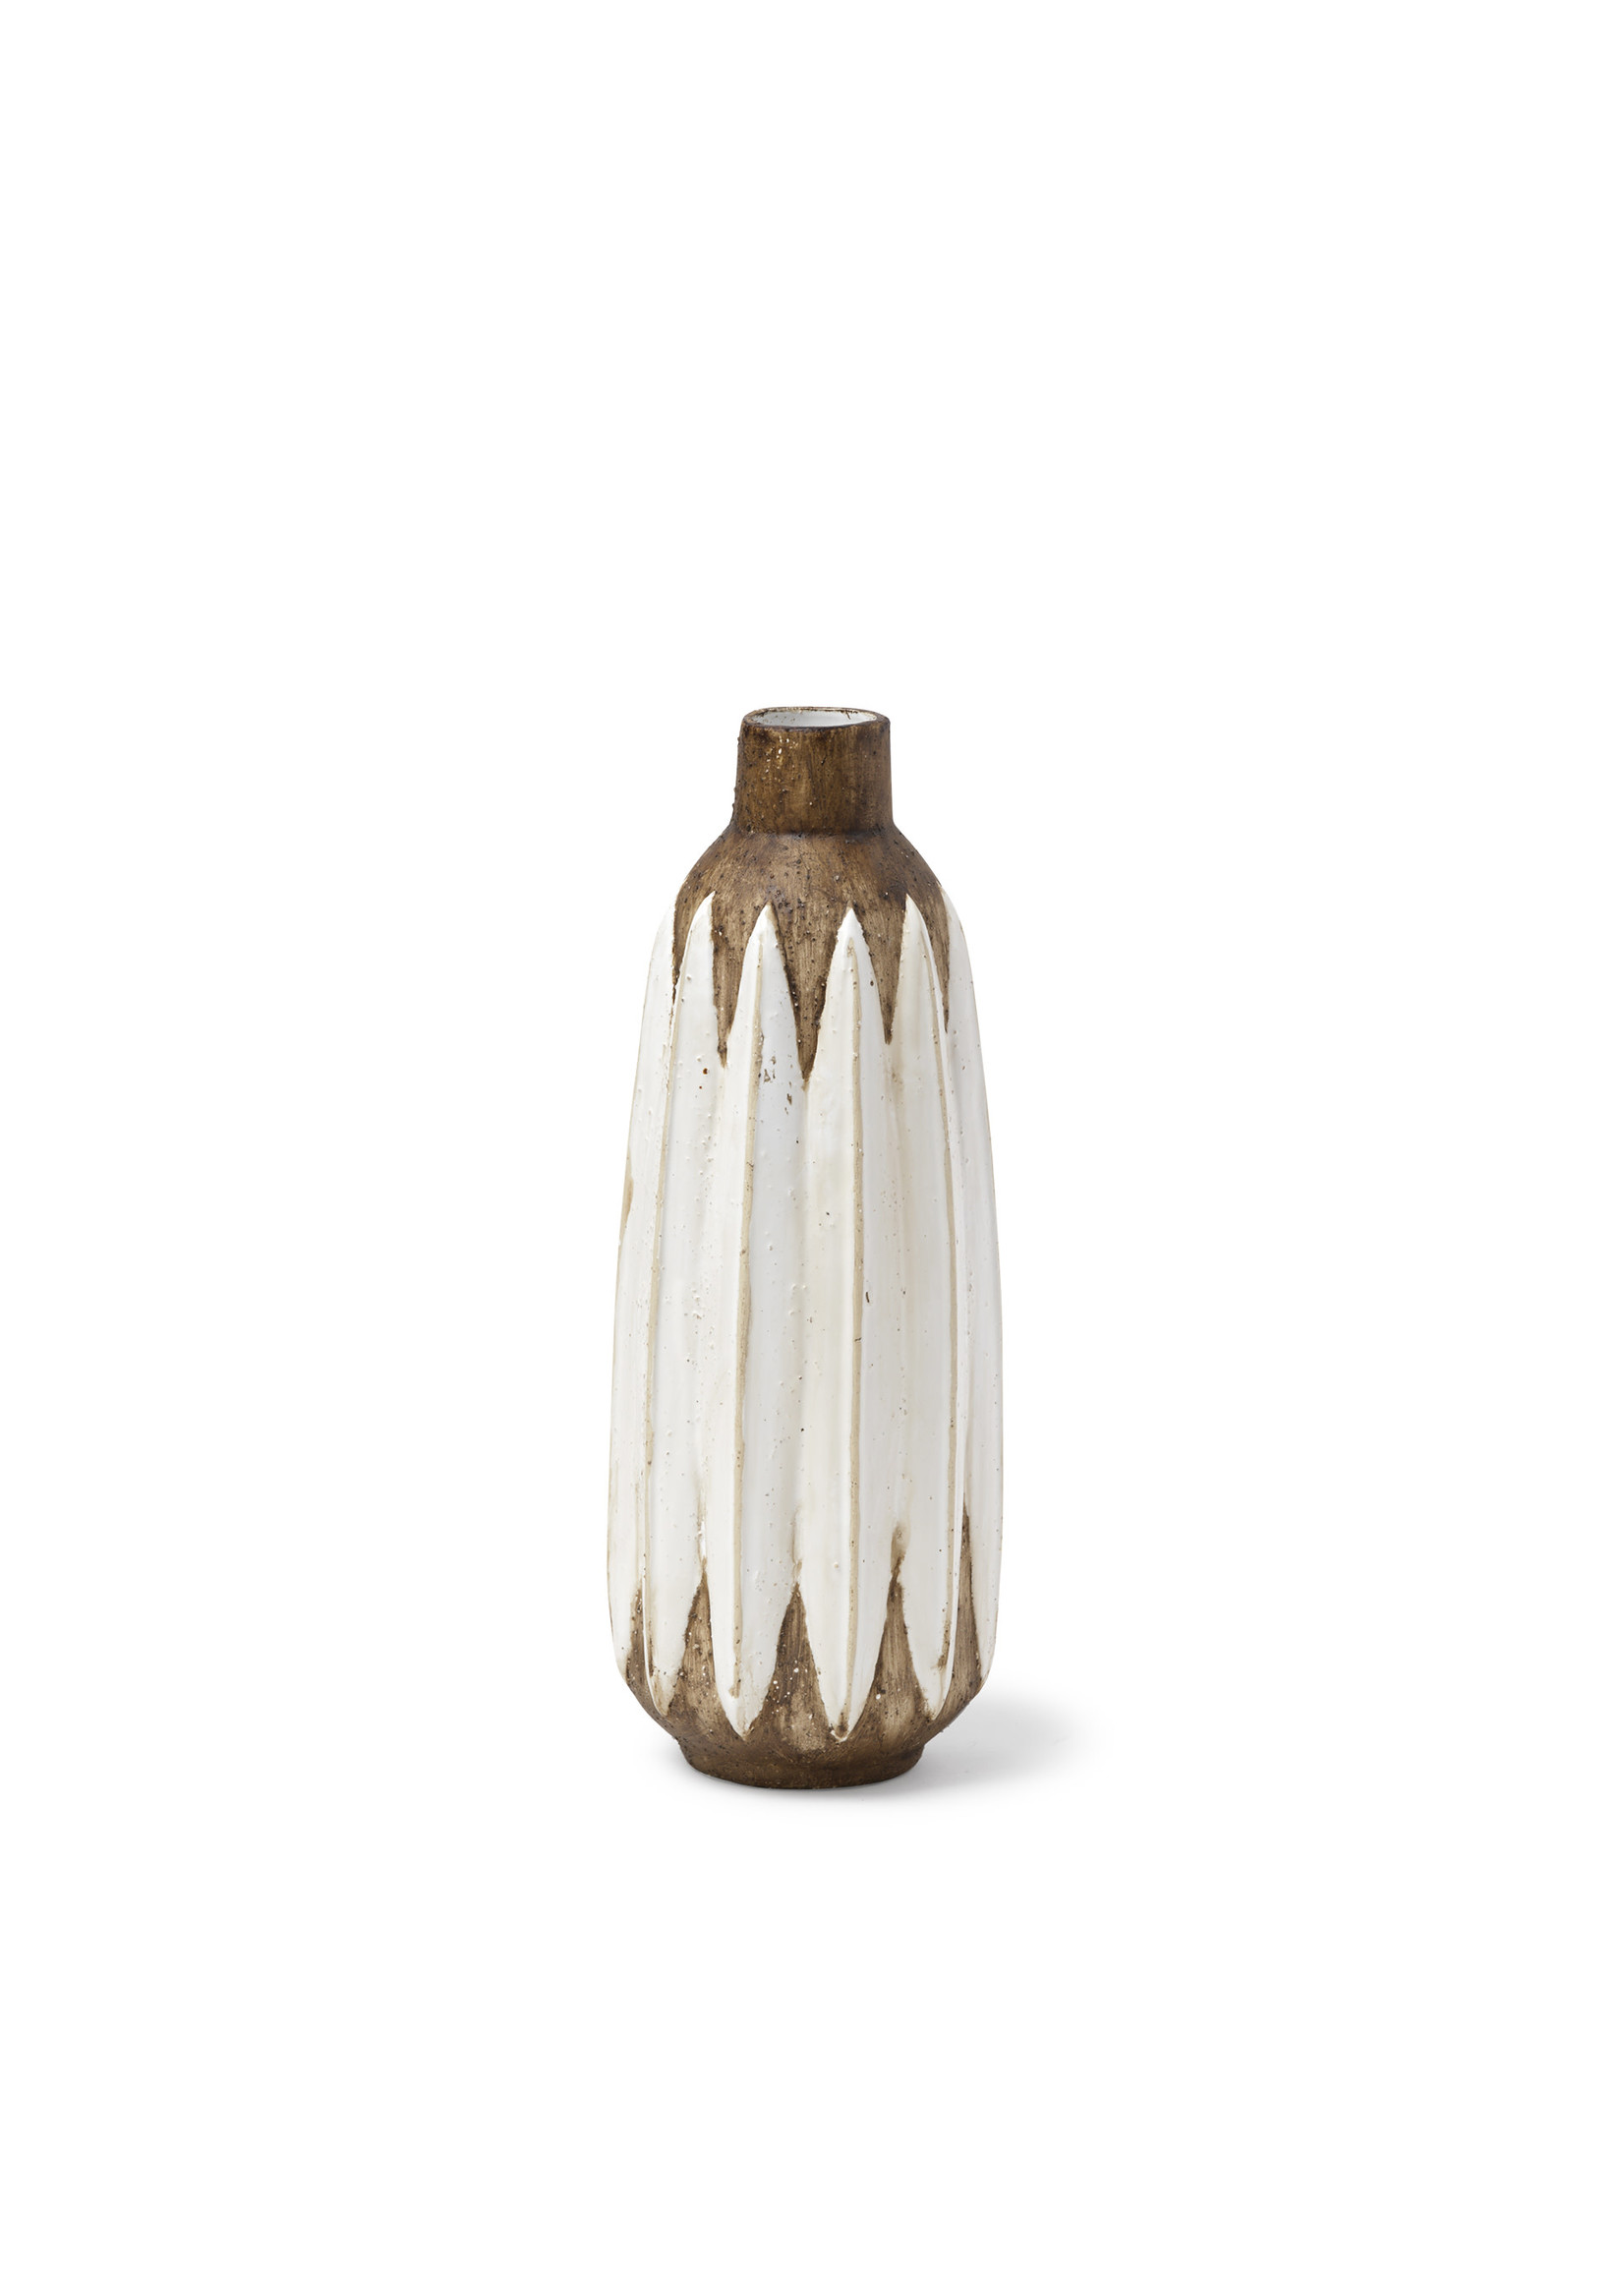 Rustic Brown and White Ceramic Vase Small